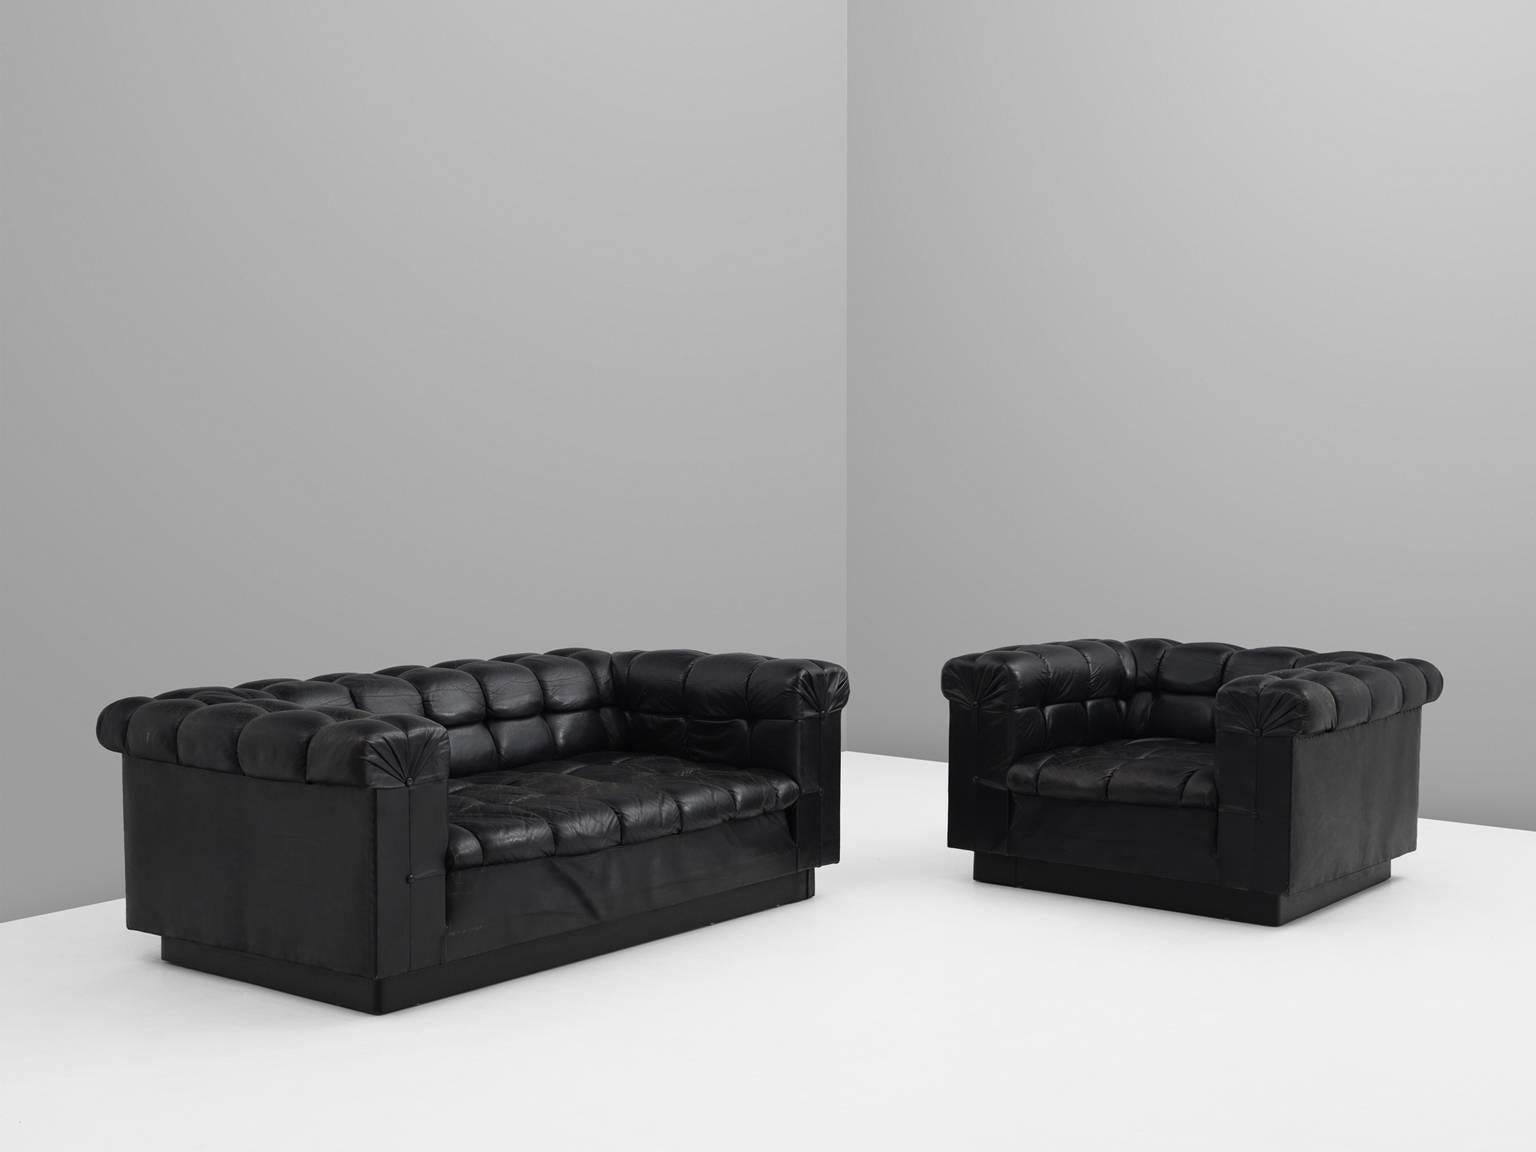 Living room set model 5407, in leather, by Edward Wormley for Dunbar, United States, 1950s.

Black leather 'Party sofa' and club chair by American designer Edward Wormley. This set has an interesting appearance of a Classic Chesterfield set with a